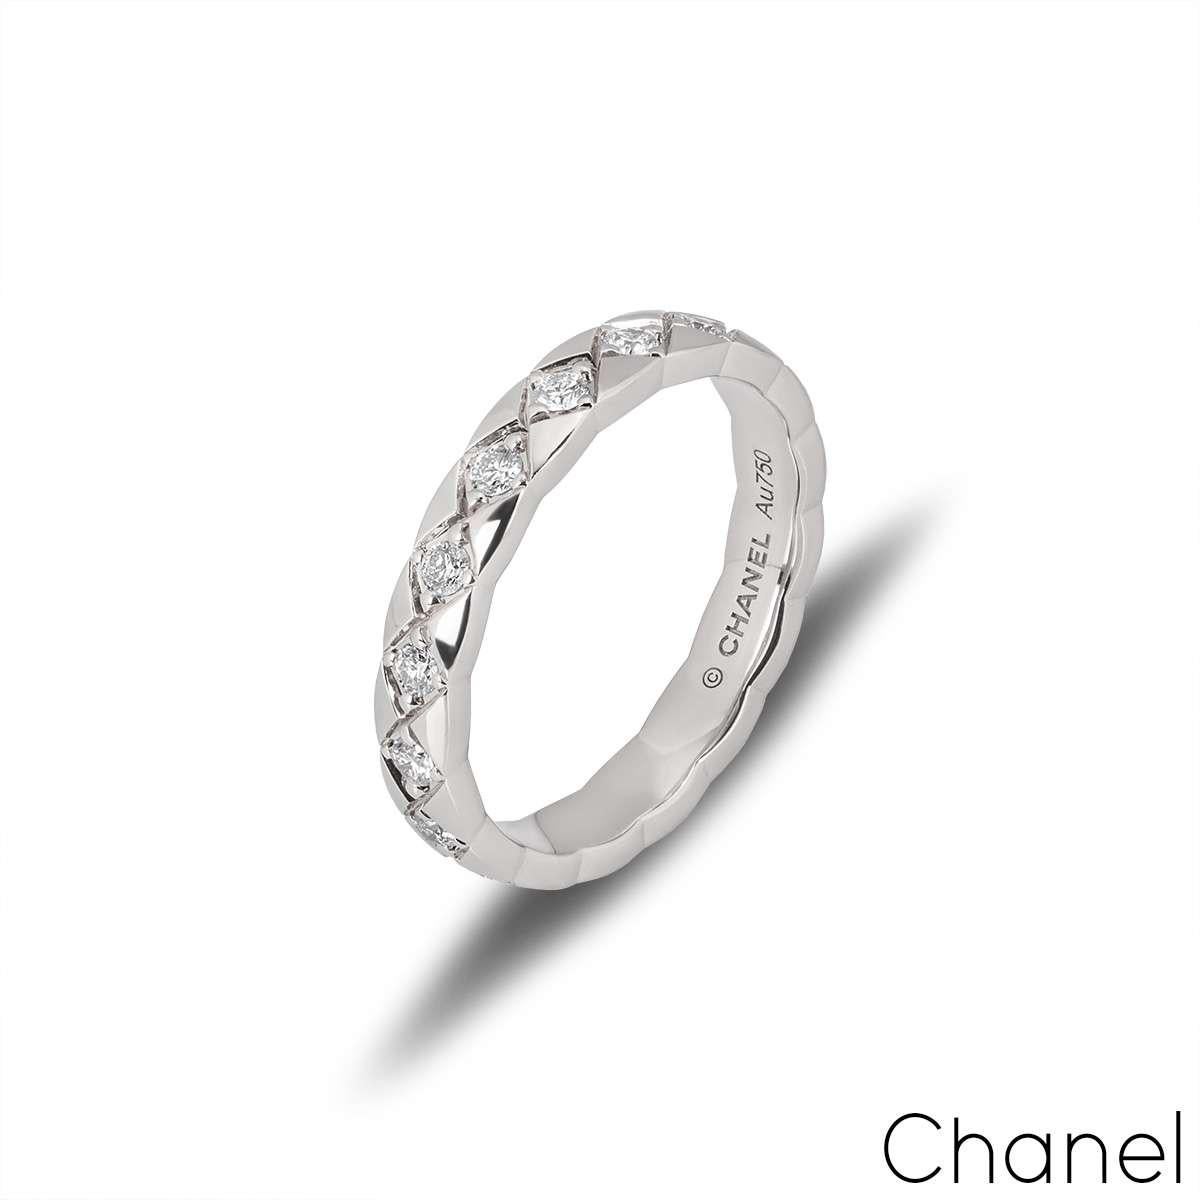 An 18k white gold ring from the Coco Crush collection by Chanel. The ring features a quilted pattern with round brilliant cut diamonds set throughout the ring. The diamonds have a total weight of 0.37ct. The ring measures 3mm in width, is a size UK